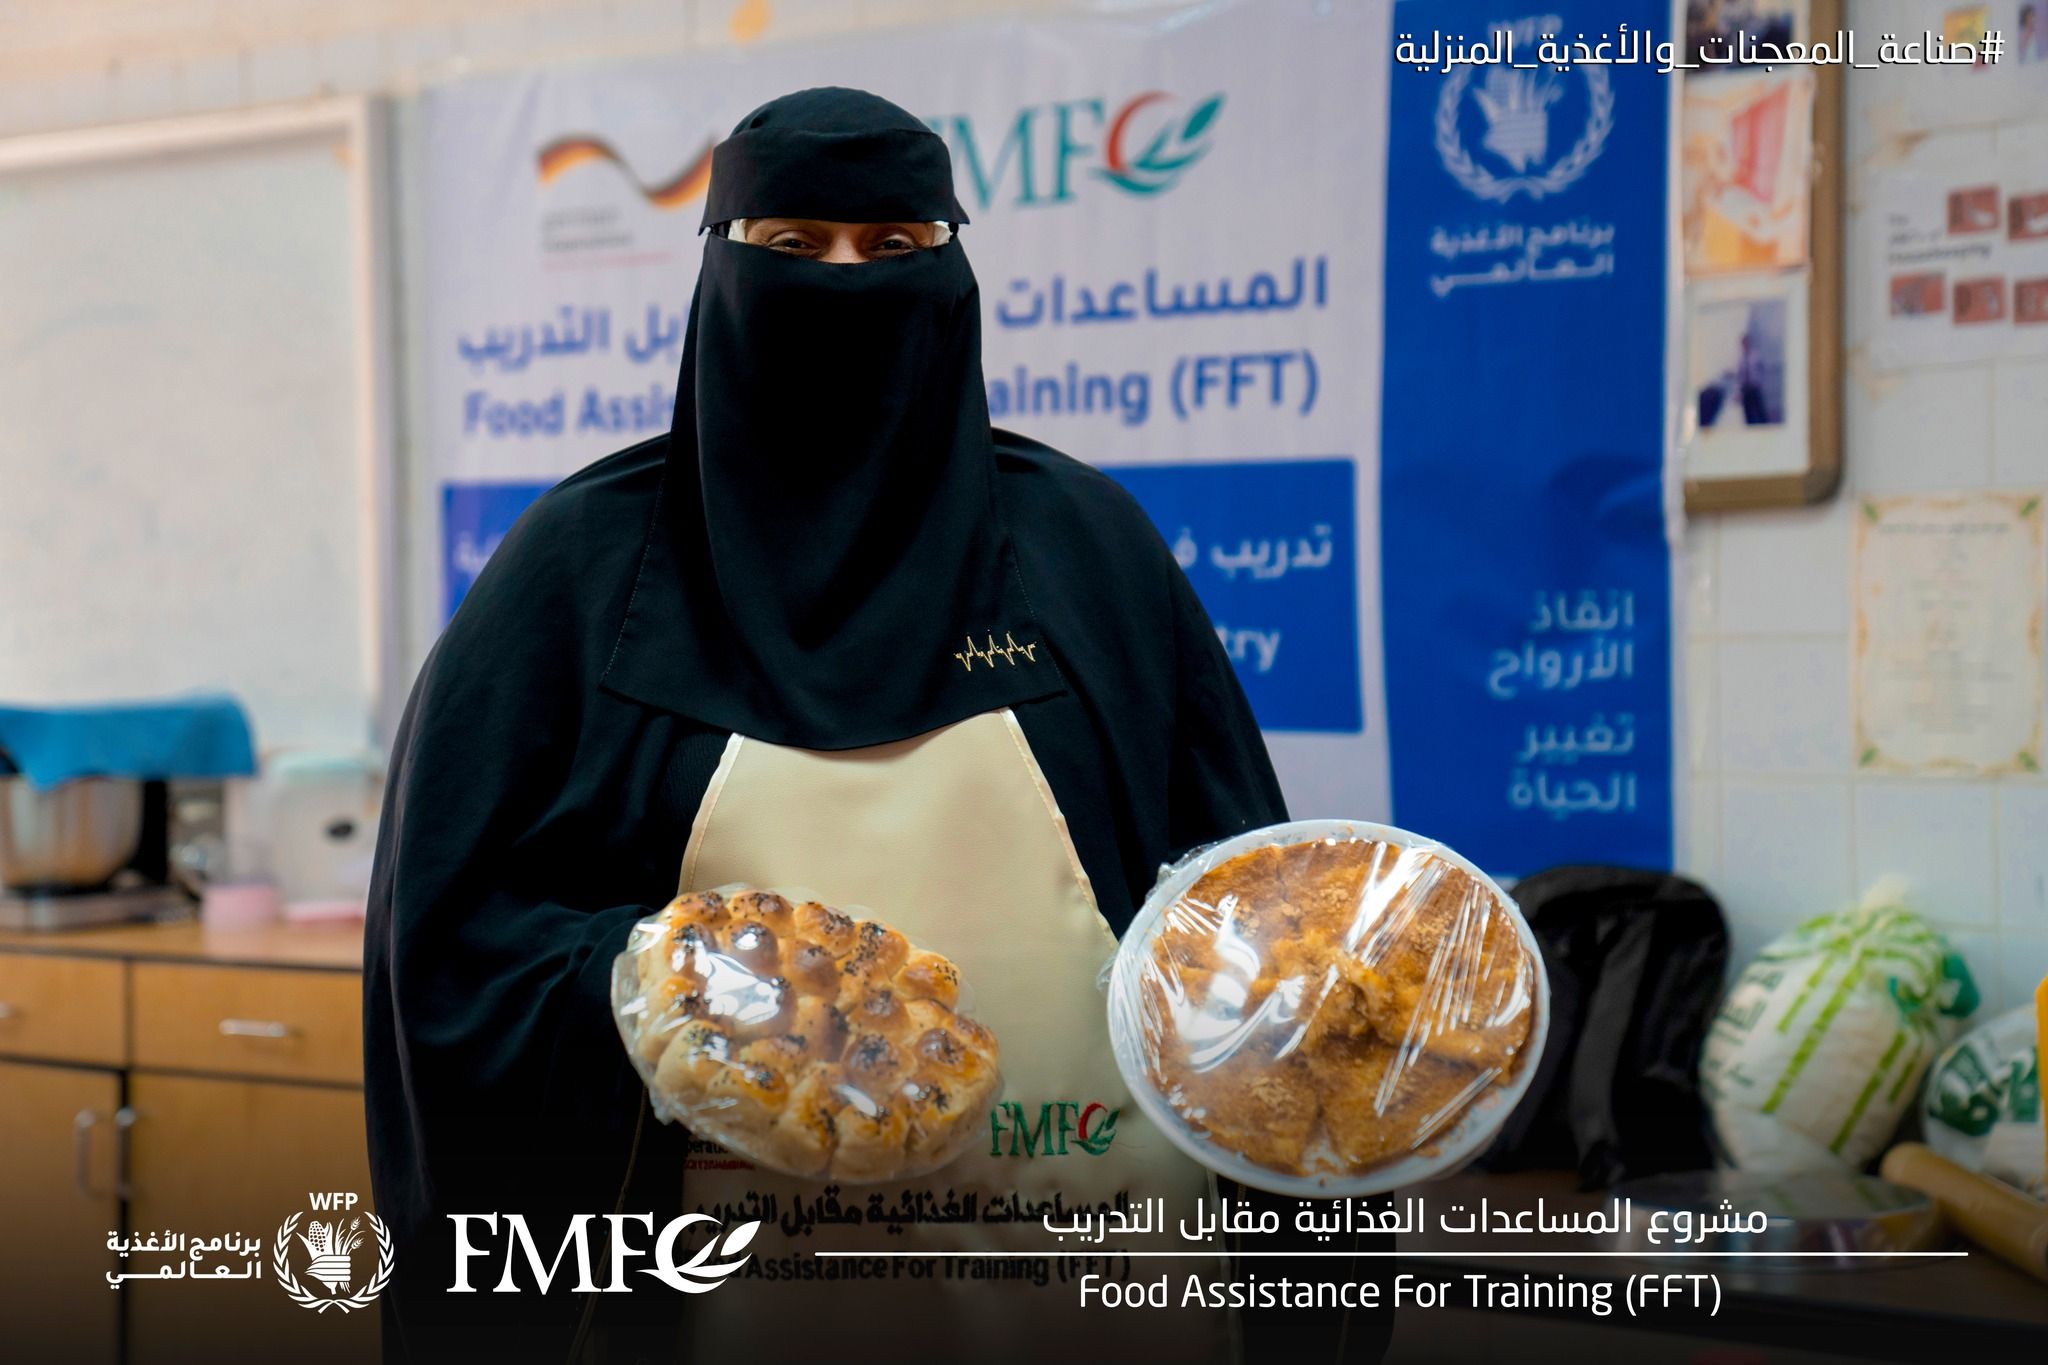 WFP Funds Project Benefiting 3,800 People in 5 Yemeni Governorates